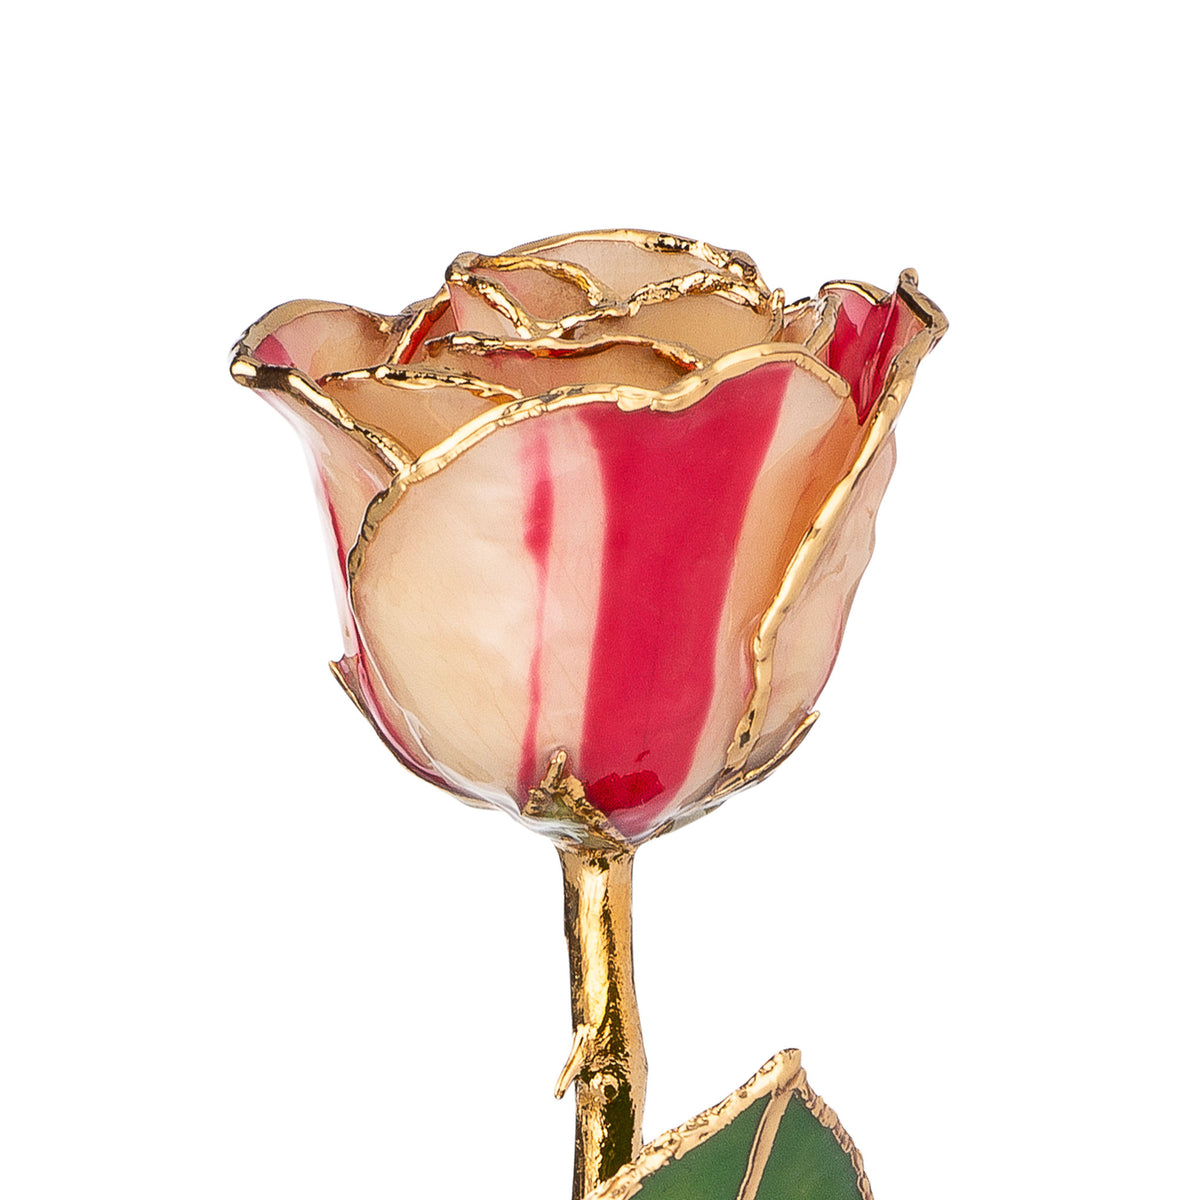 24K Gold Trimmed Forever Rose with Peppermint Striped Petals. View of Stem, Leaves, and Rose Petals and Showing Detail of Gold Trim